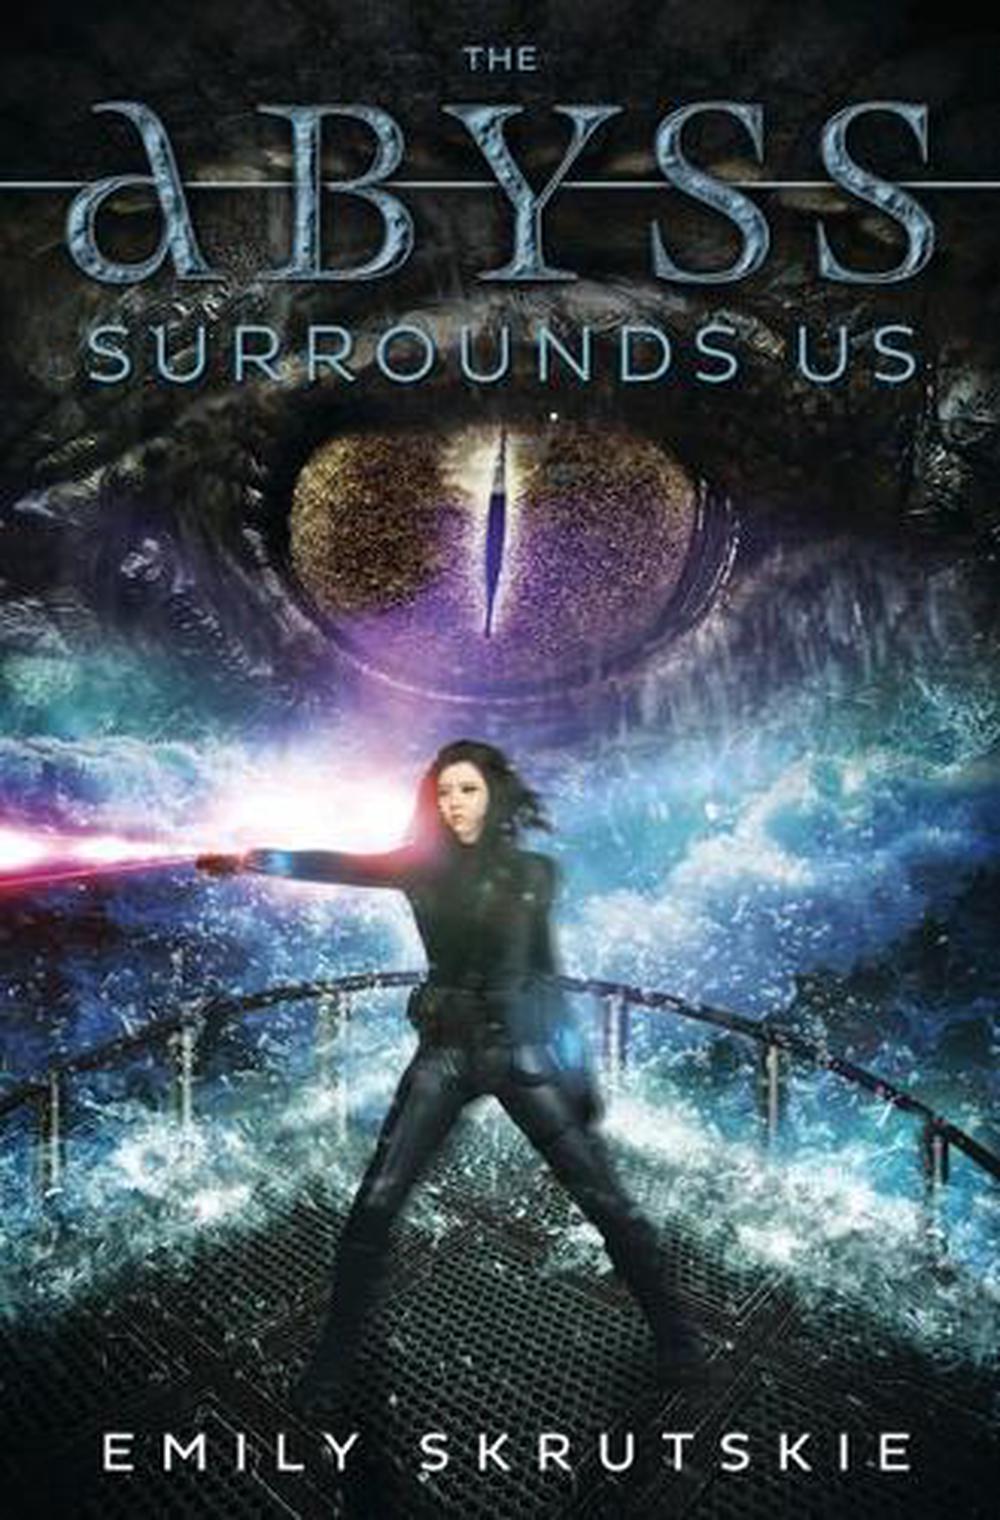 the abyss surrounds us by emily skrutskie